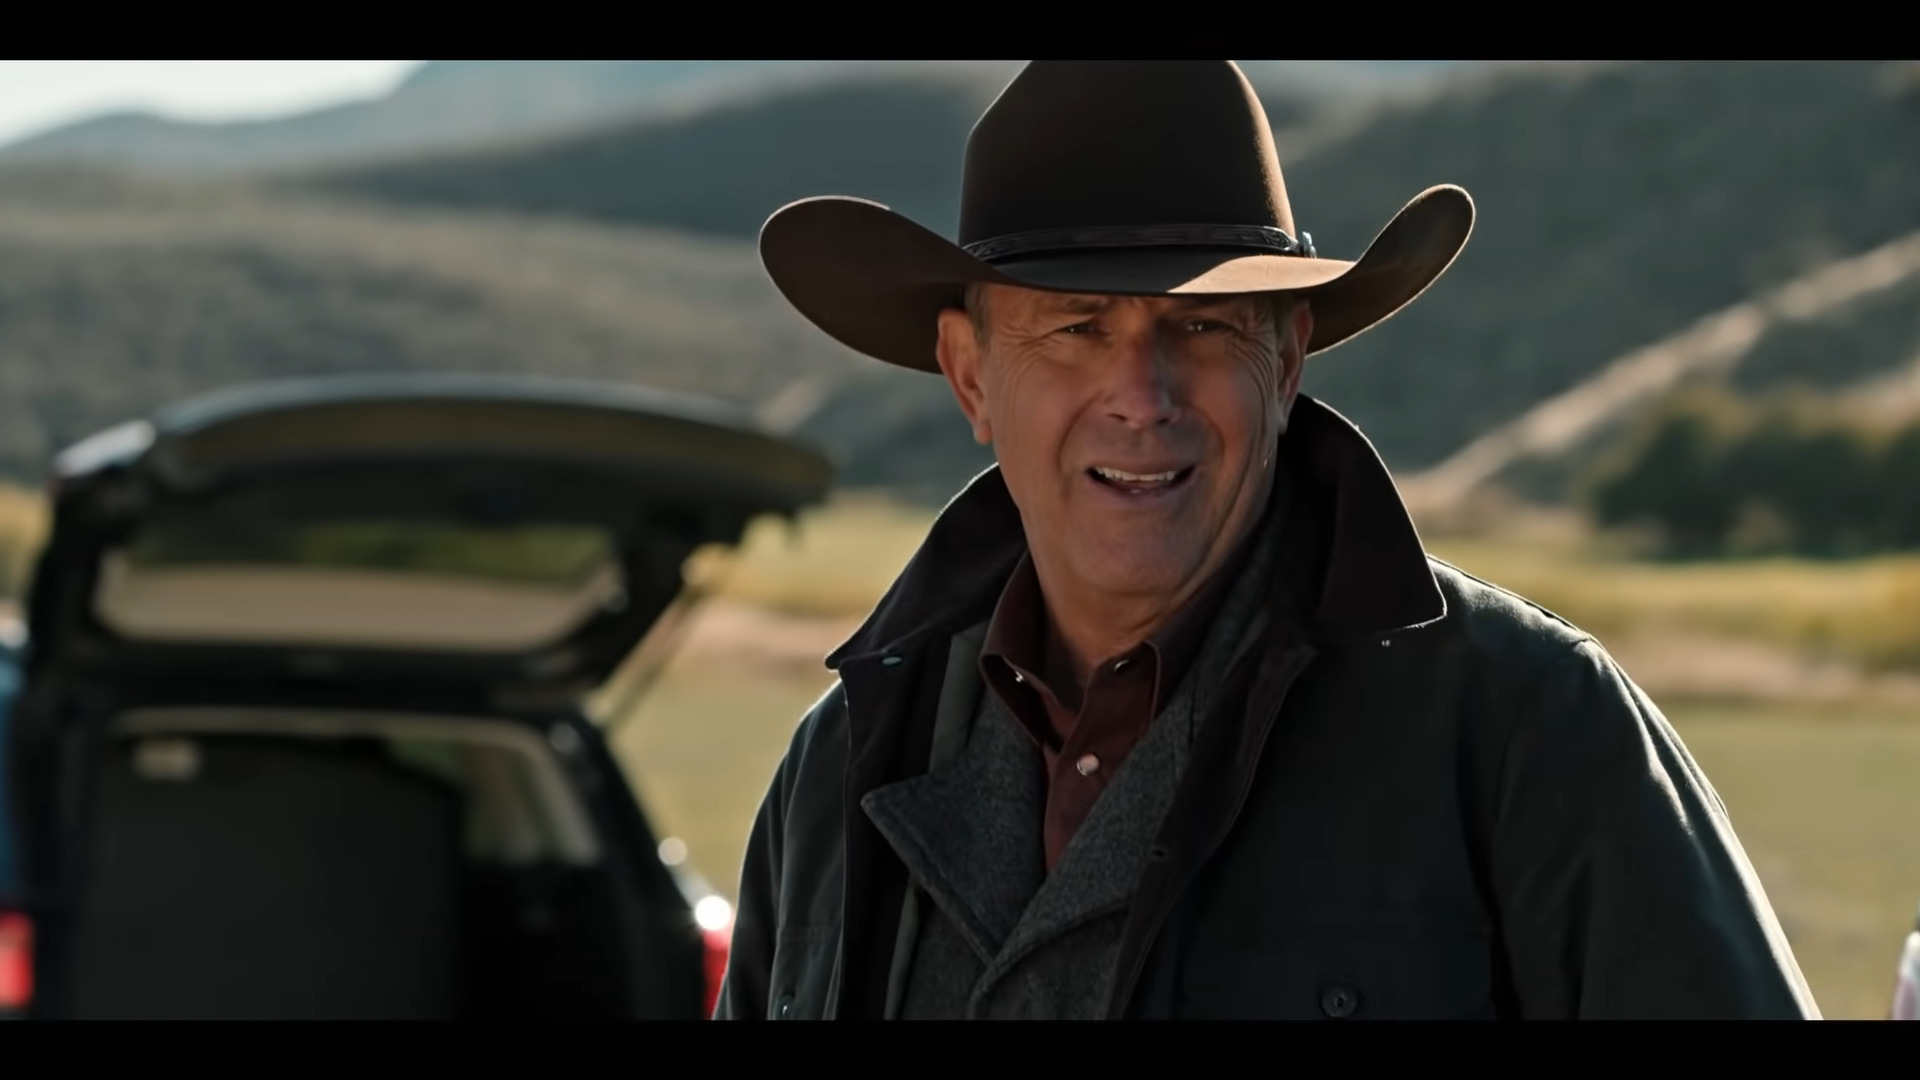 Kevin Costner's Yellowstone becomes the most watched non-woke tv show of 2022